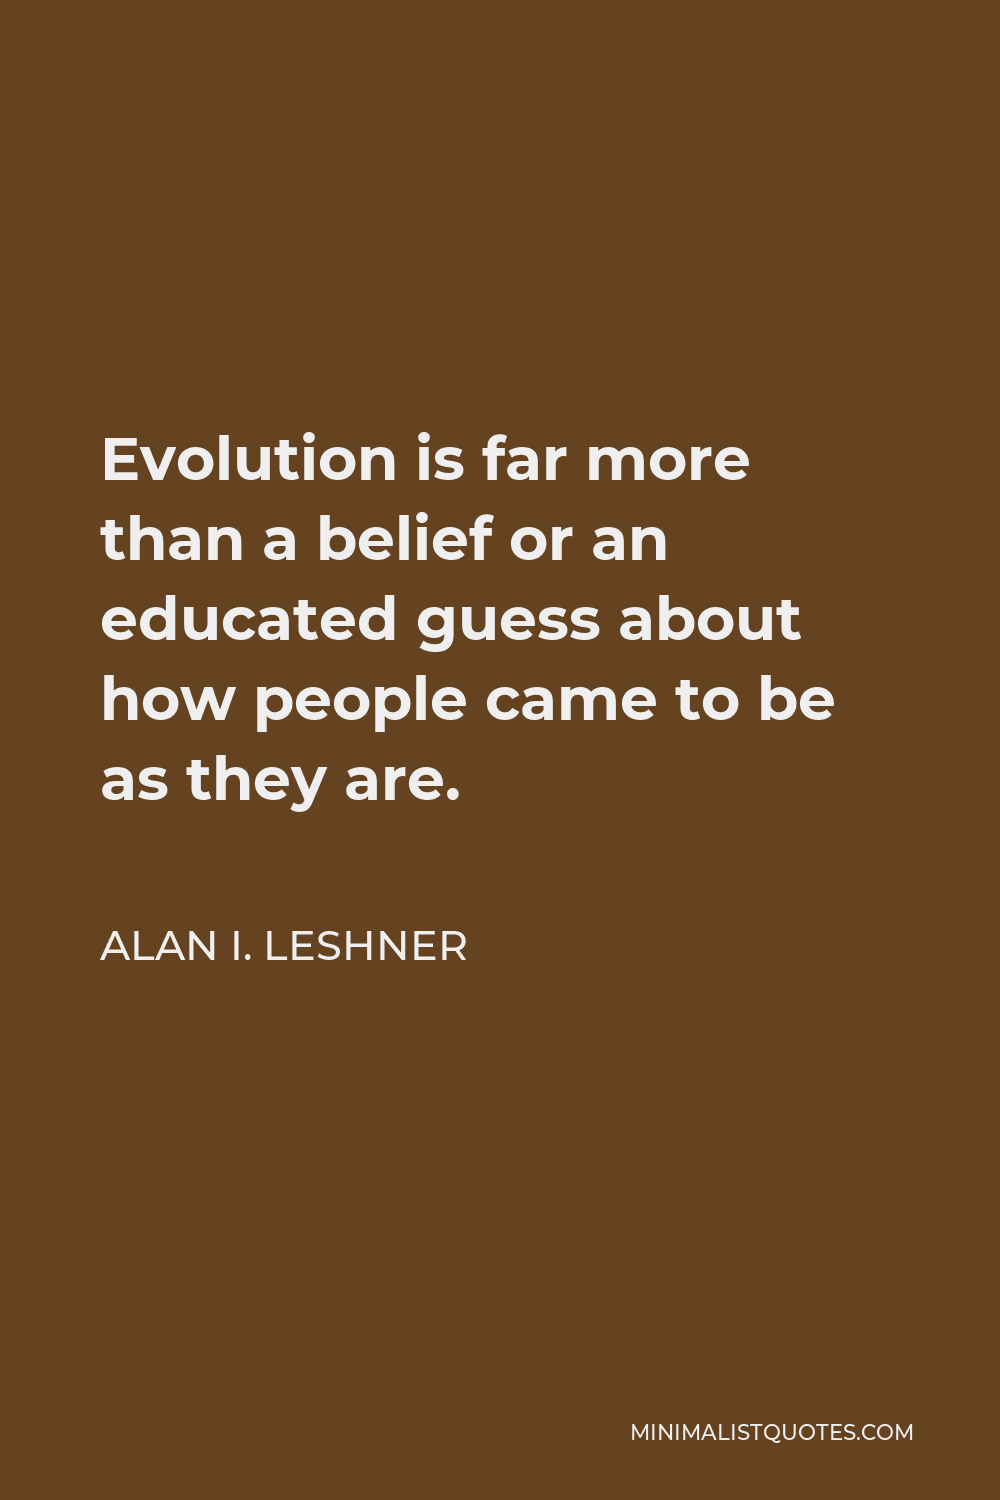 Alan I. Leshner Quote - Evolution is far more than a belief or an educated guess about how people came to be as they are.